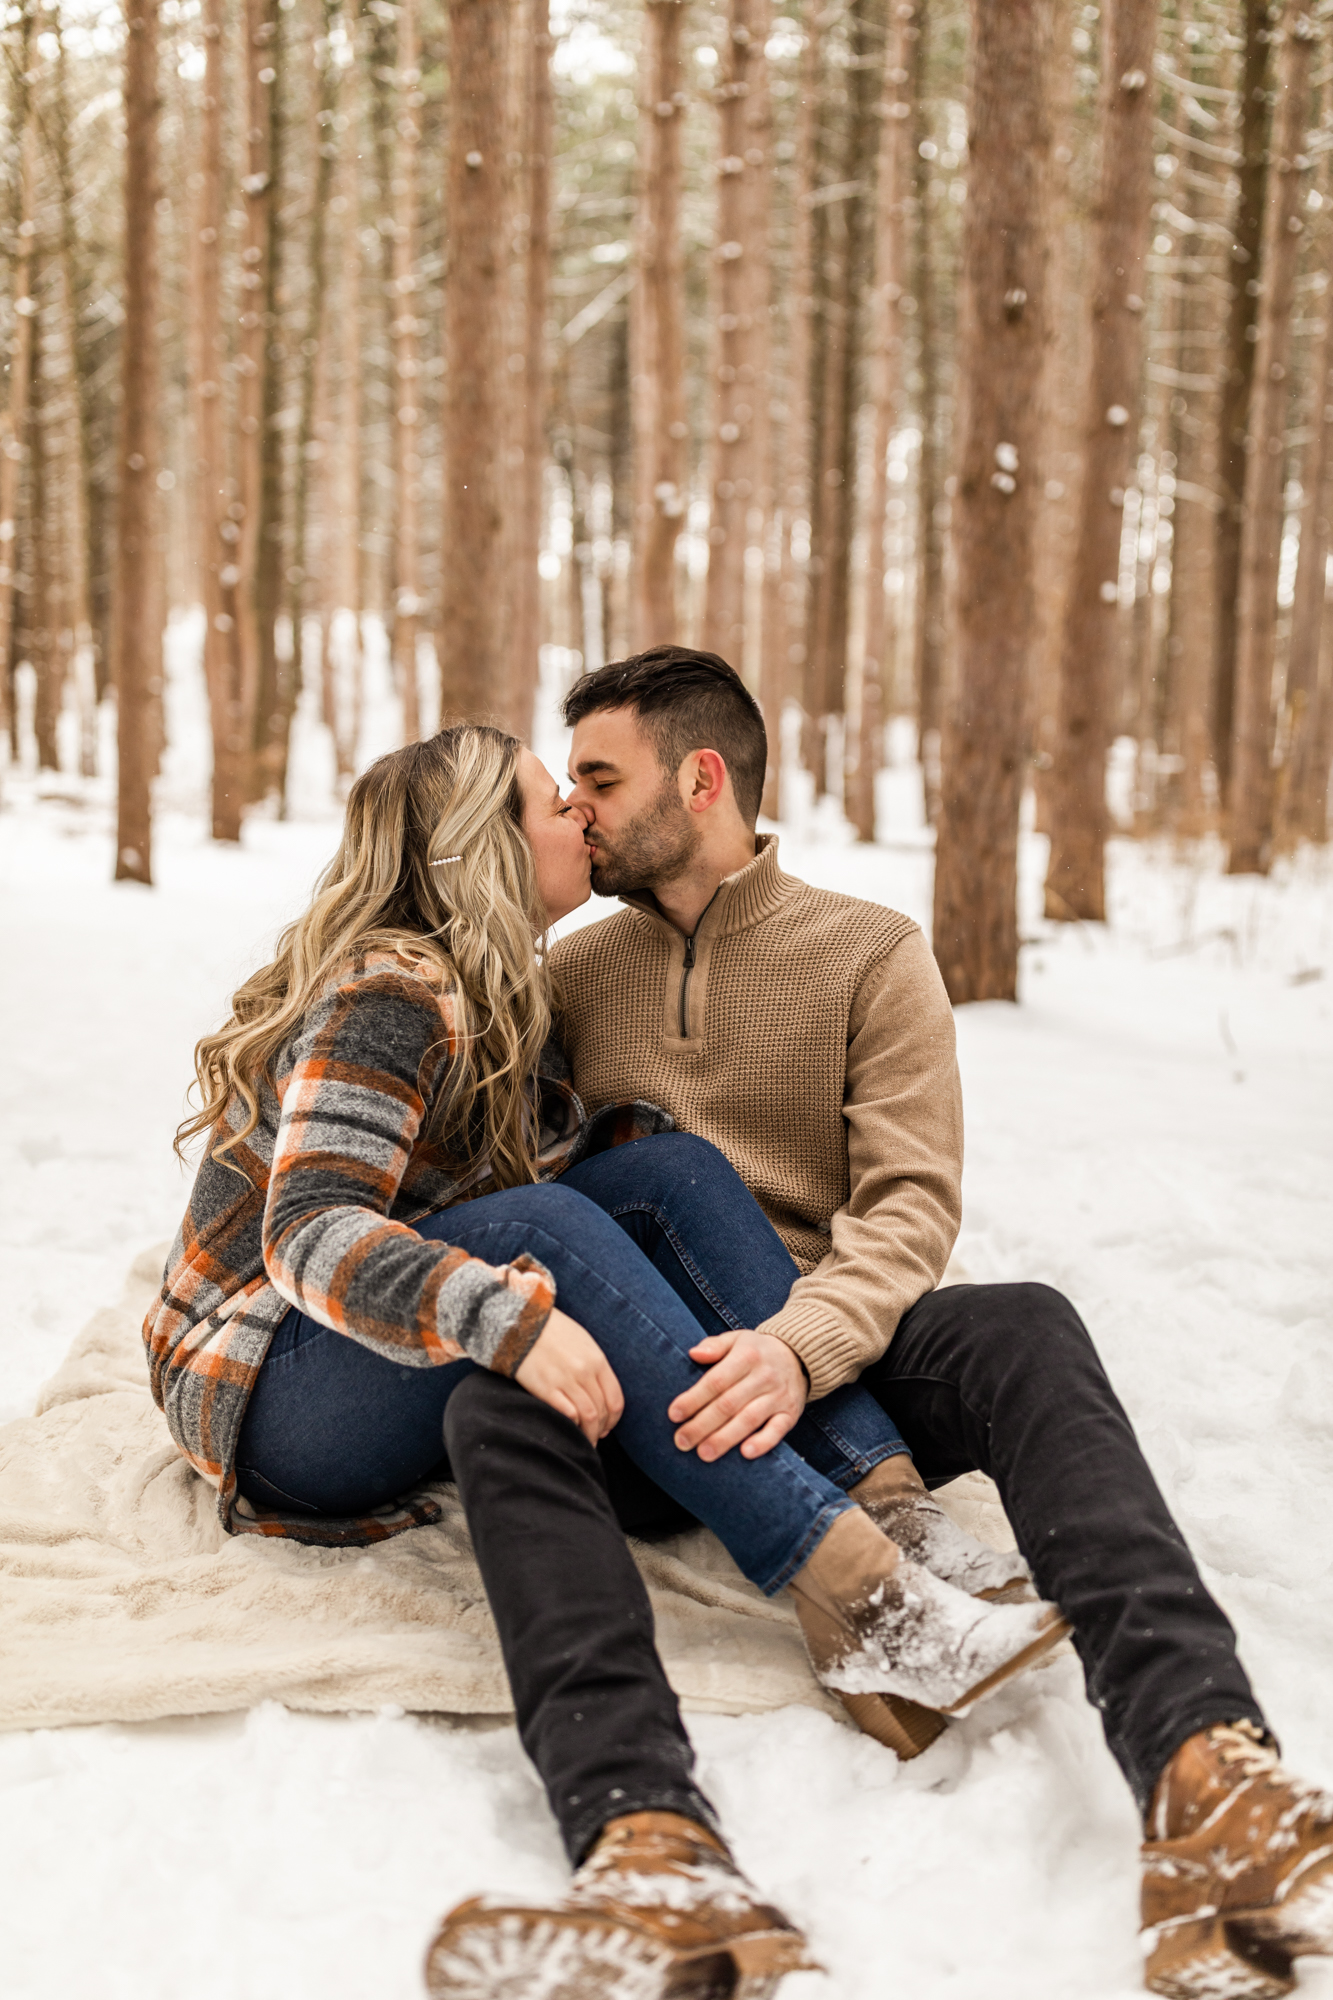 Couple sitting on blanket and kissing in snowy woods for winter engagement photos in Michigan